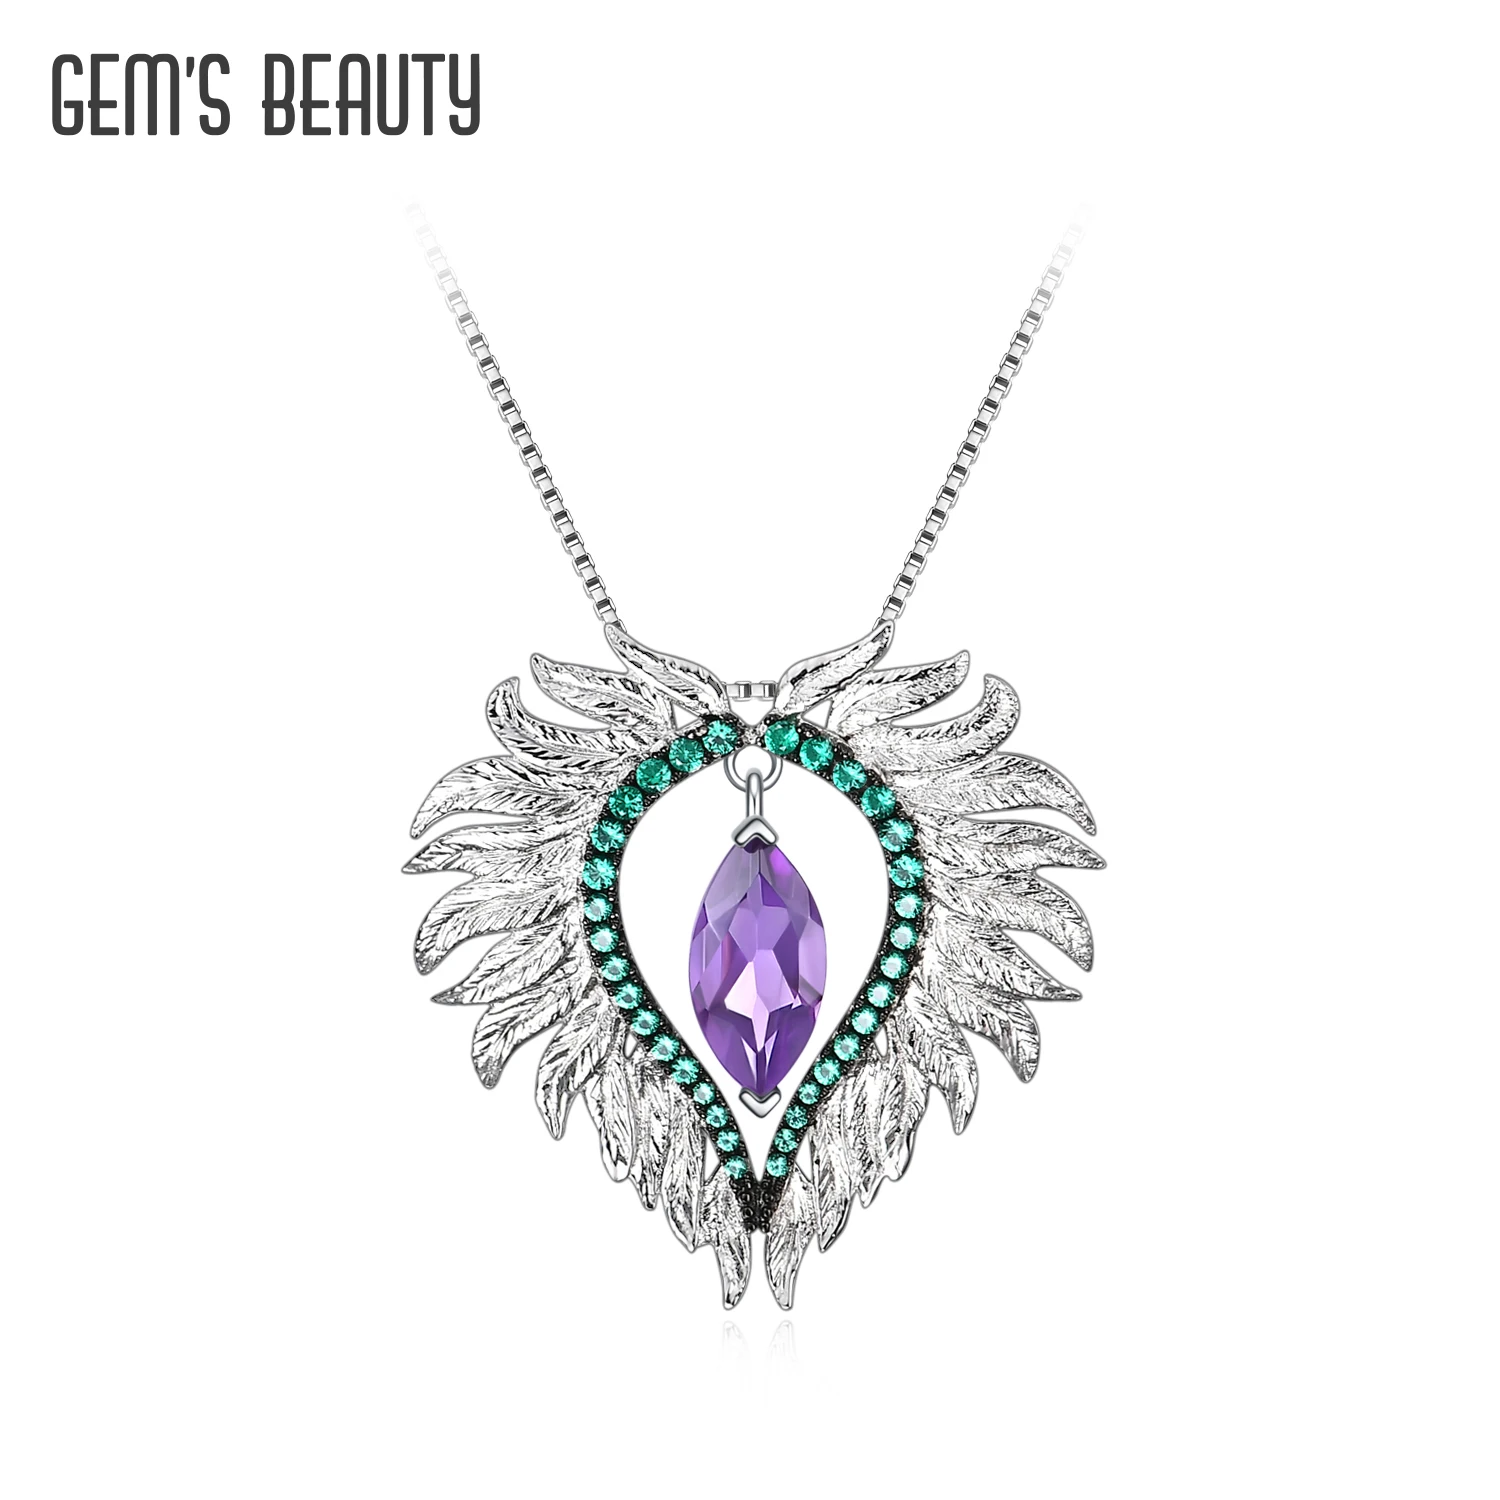 Gem's Beauty 925 Sterling Silver Necklace Pendant For Women Fashion Bijoux Amethyst Feather Angel's Wing Statement Jewelry Gifts  - buy with discount